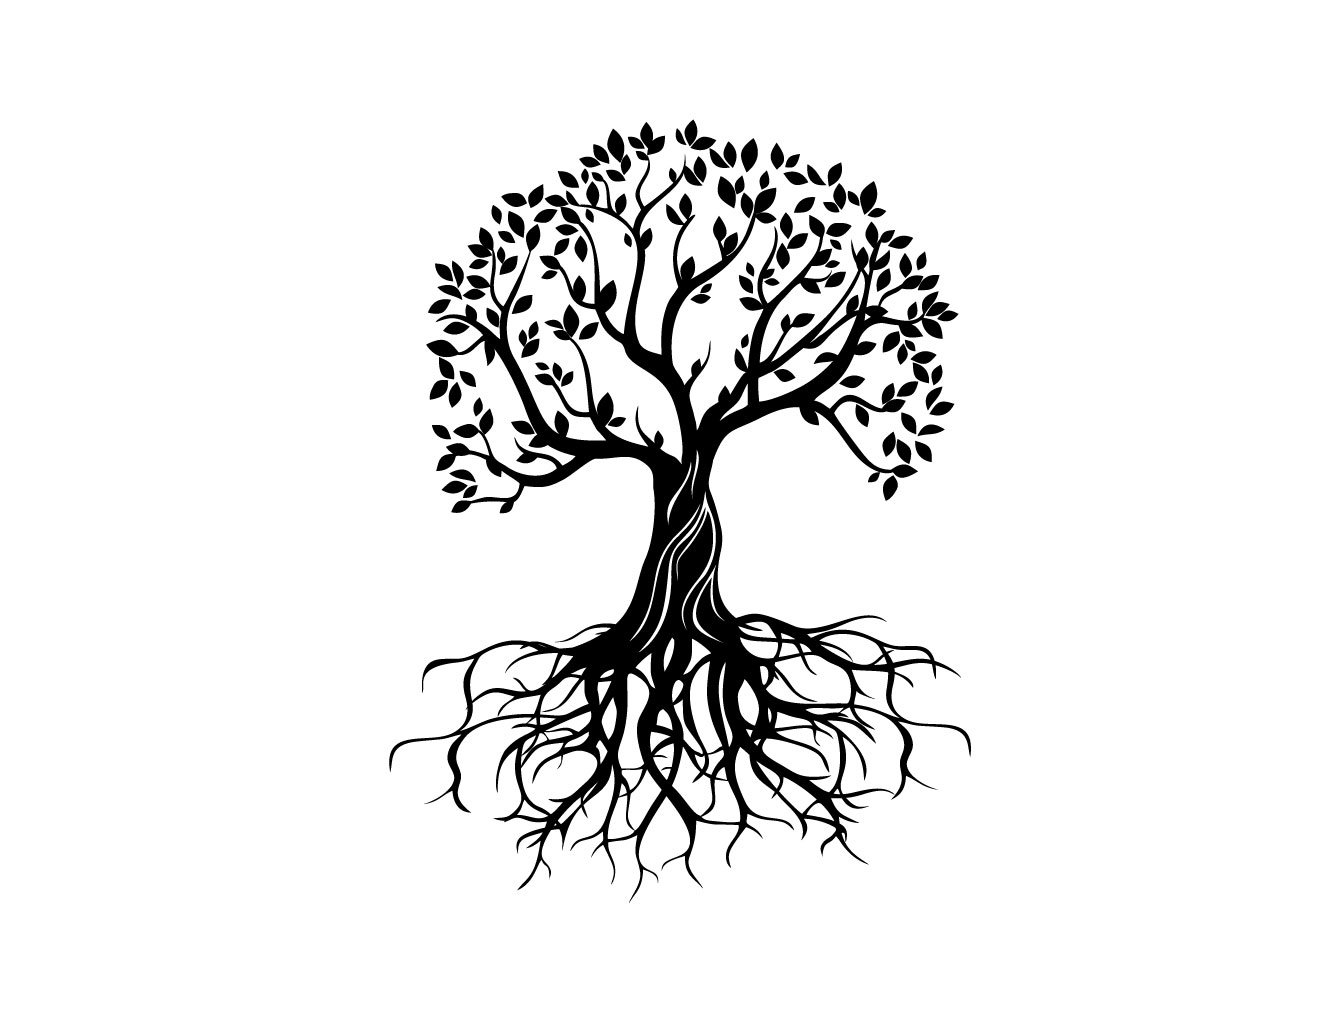 Black and white drawing of a tree with roots.